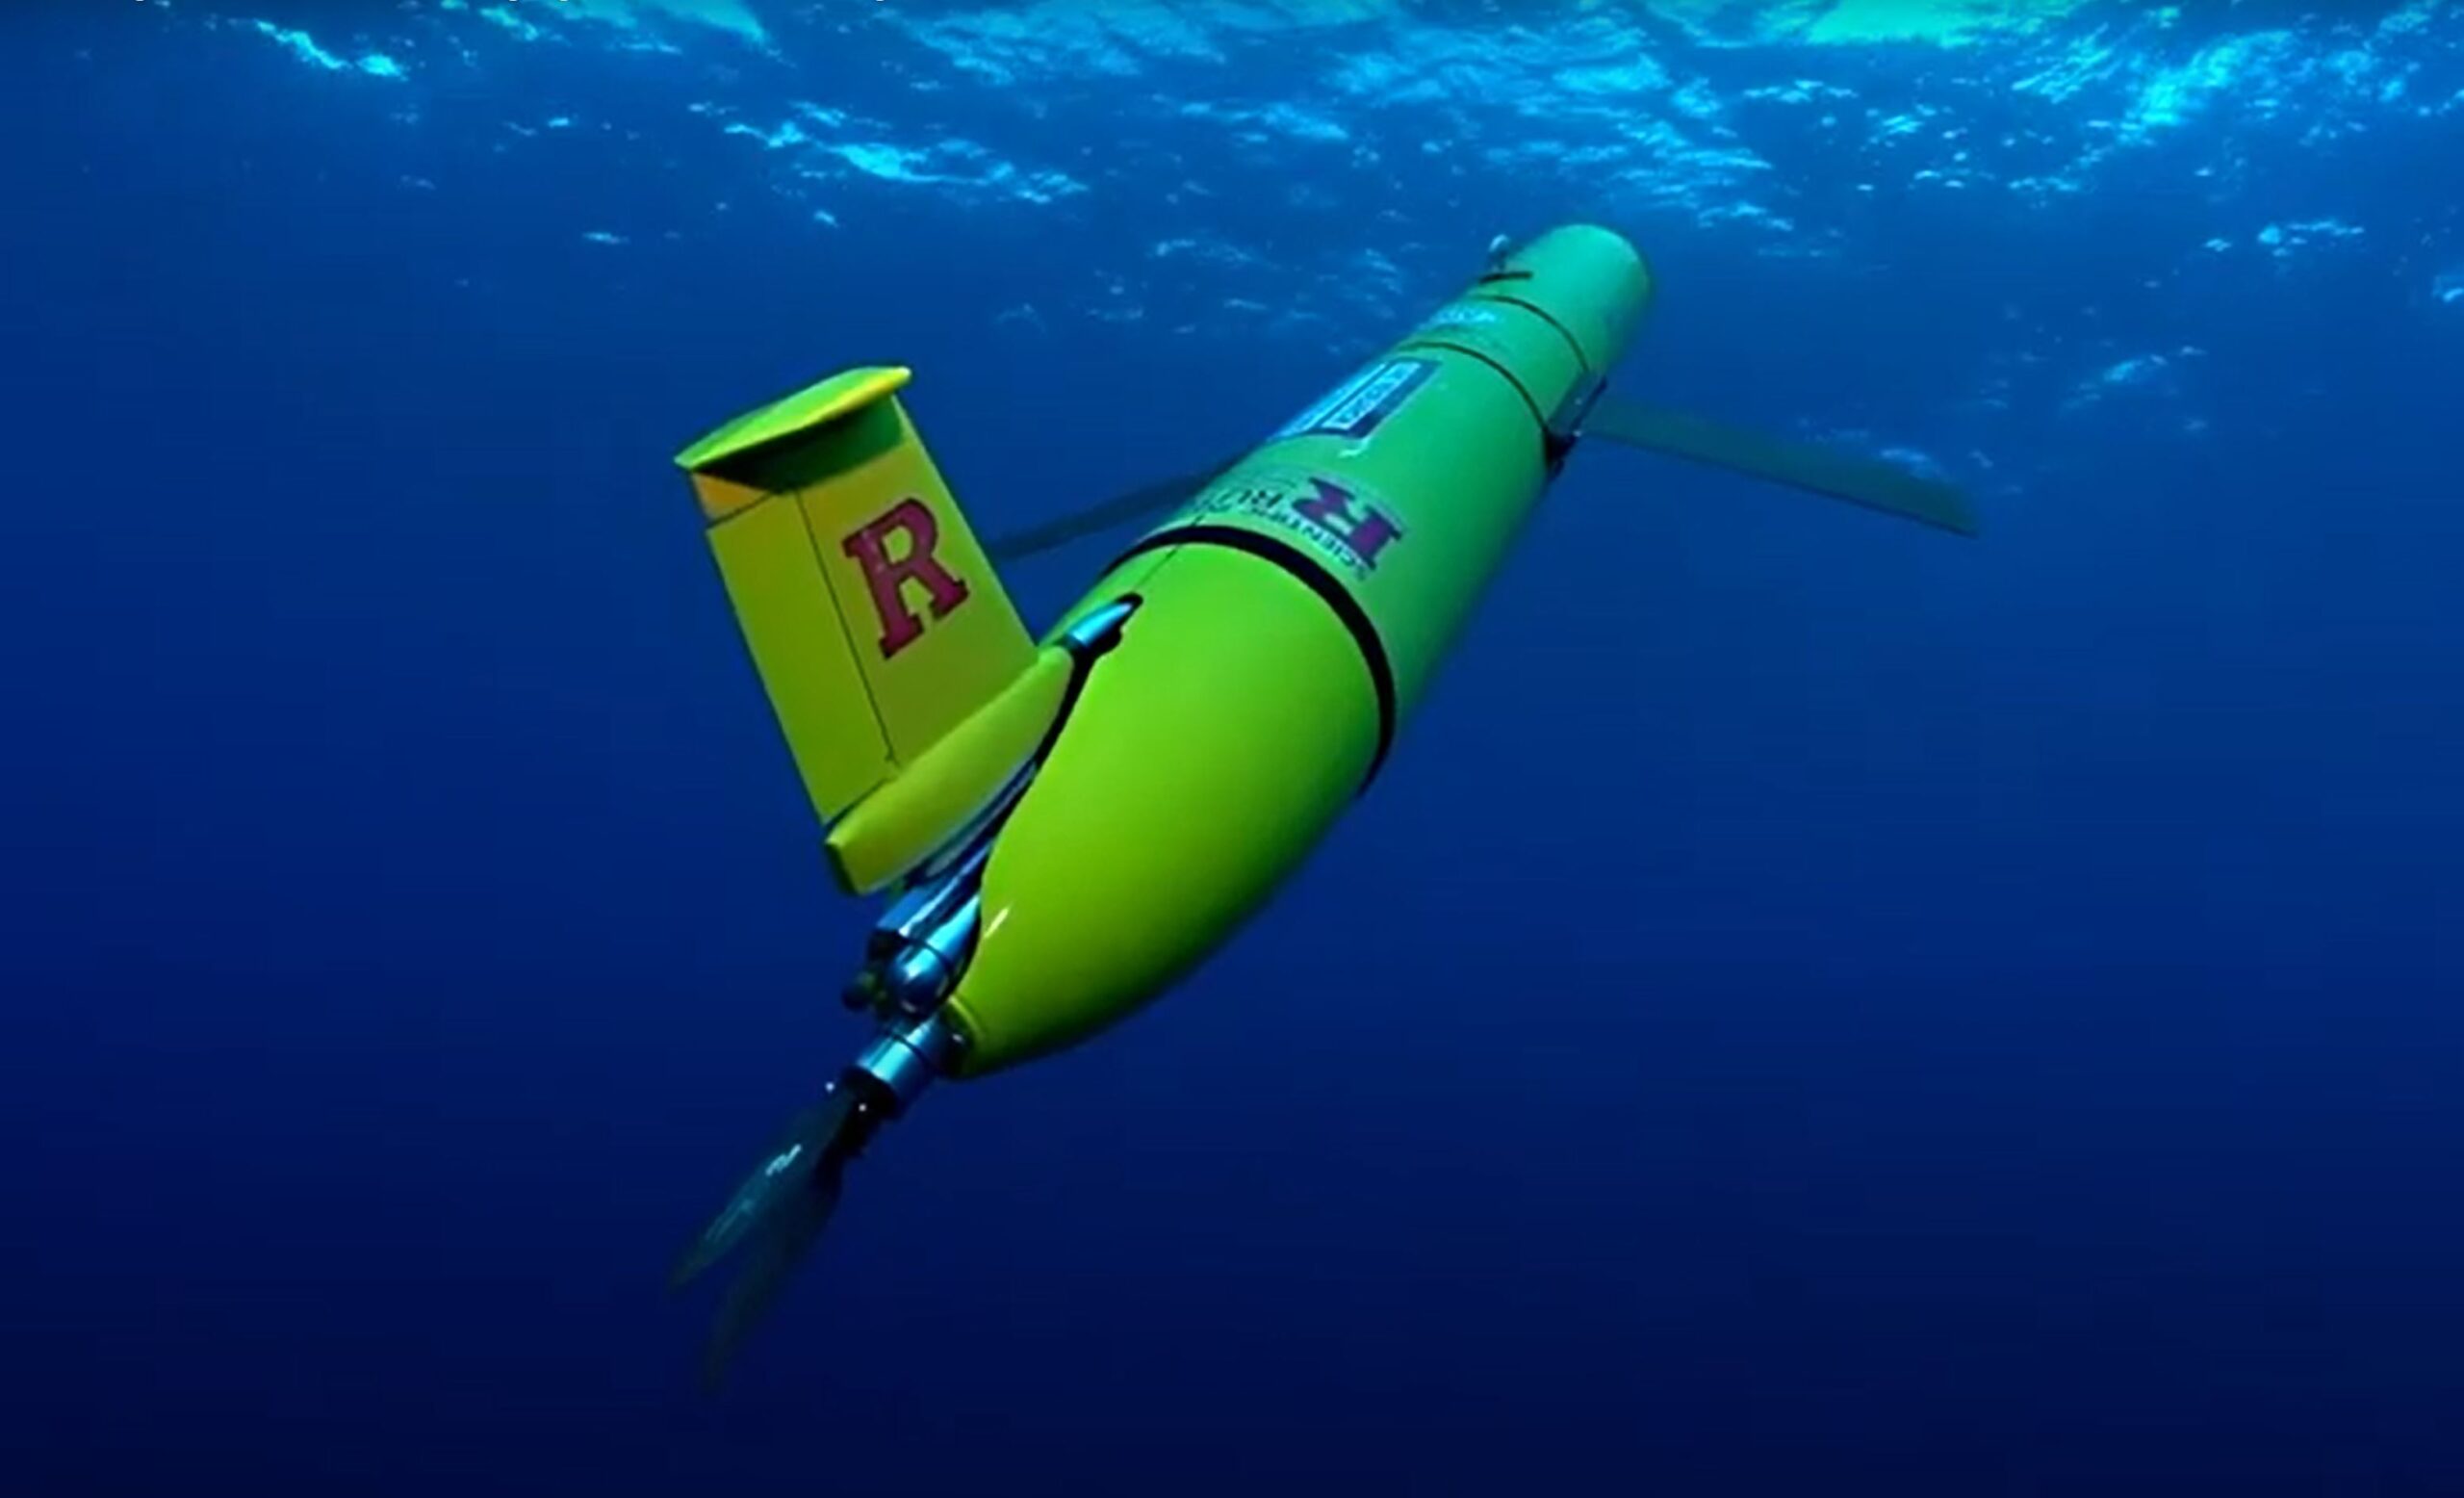 Uncrewed Ocean Gliders and Saildrones Support Hurricane Forecasting and Research